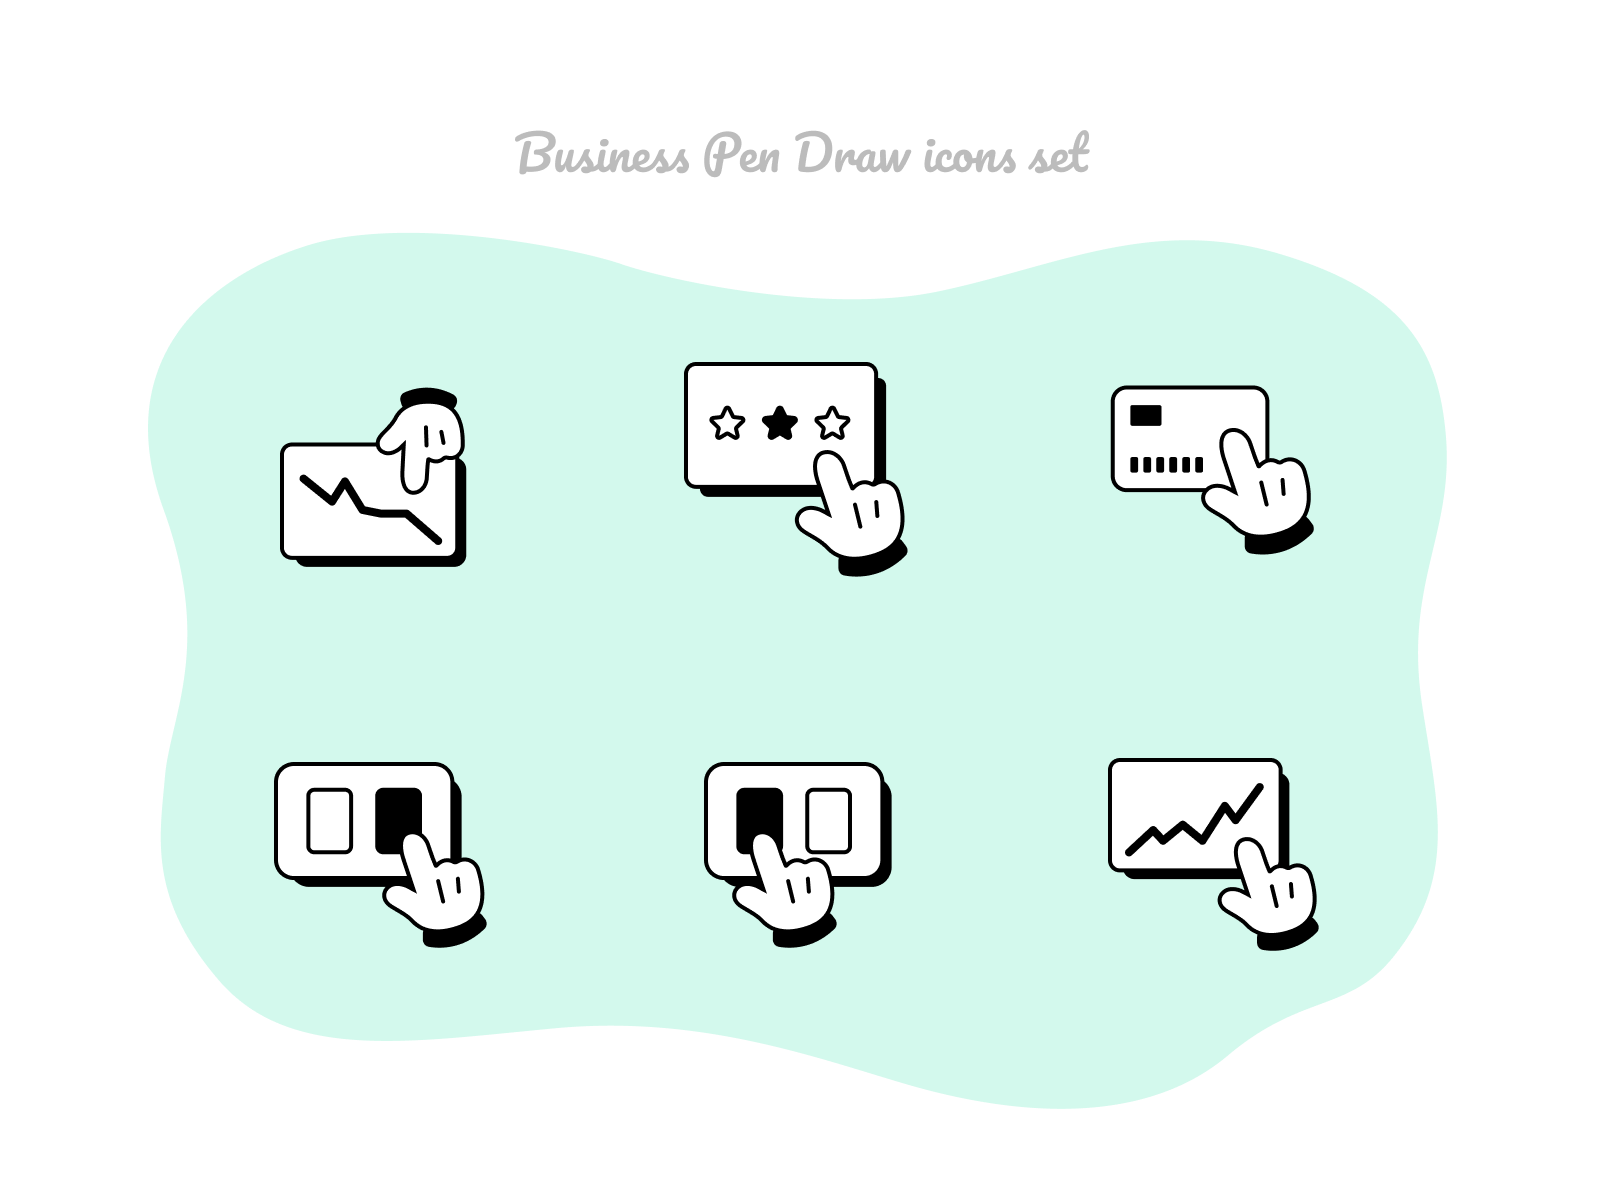 Business Pen Draw icons set #9 business currency finance hands icons icons set item plans presentation rating review stock